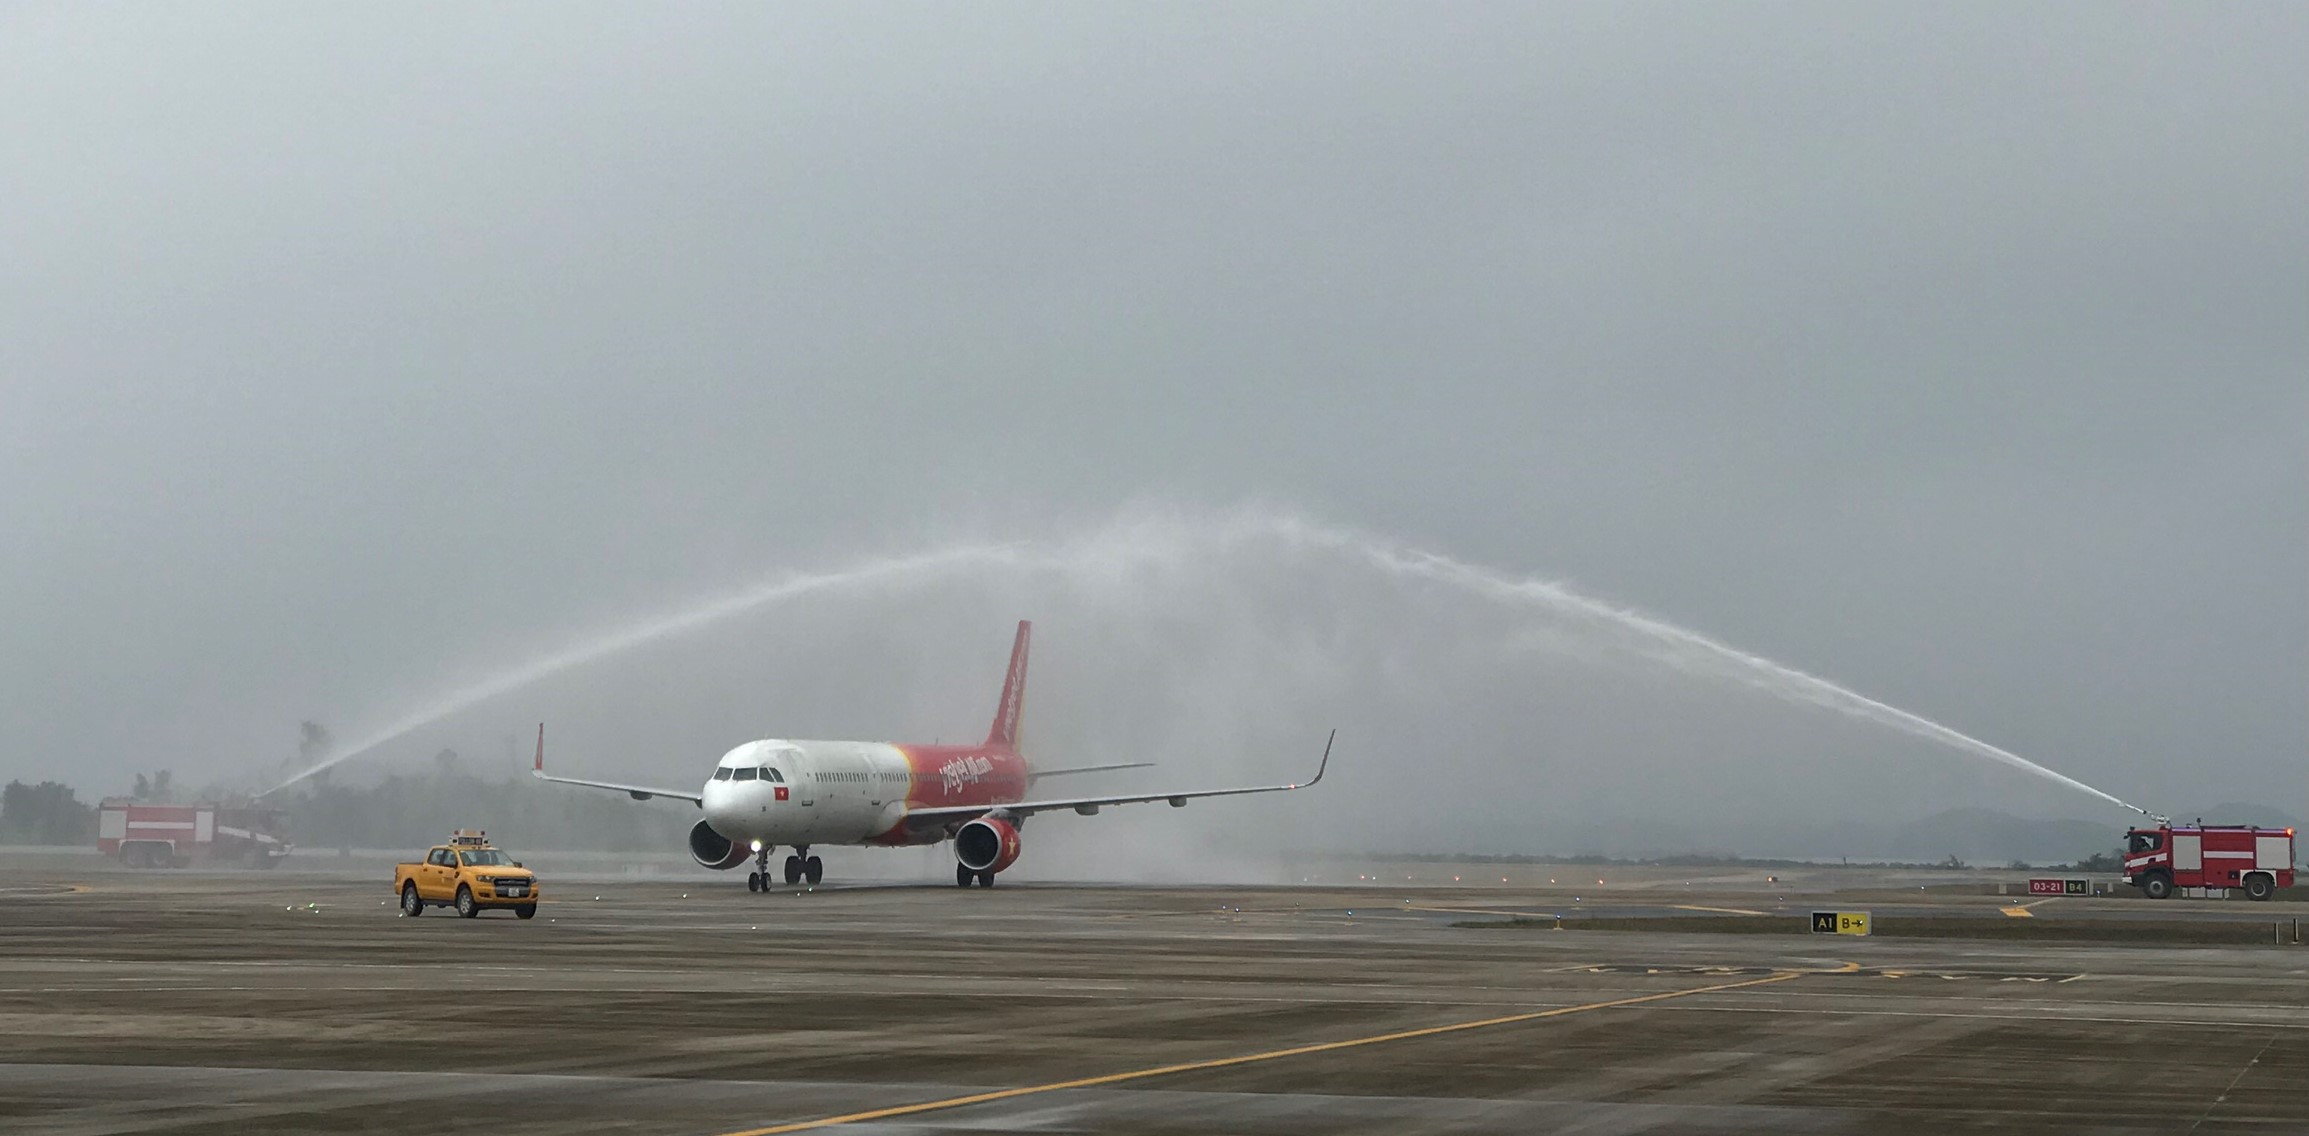 Vietnam’s low-cost airline launches flights connecting Ho Chi Minh City and Ha Long Bay home